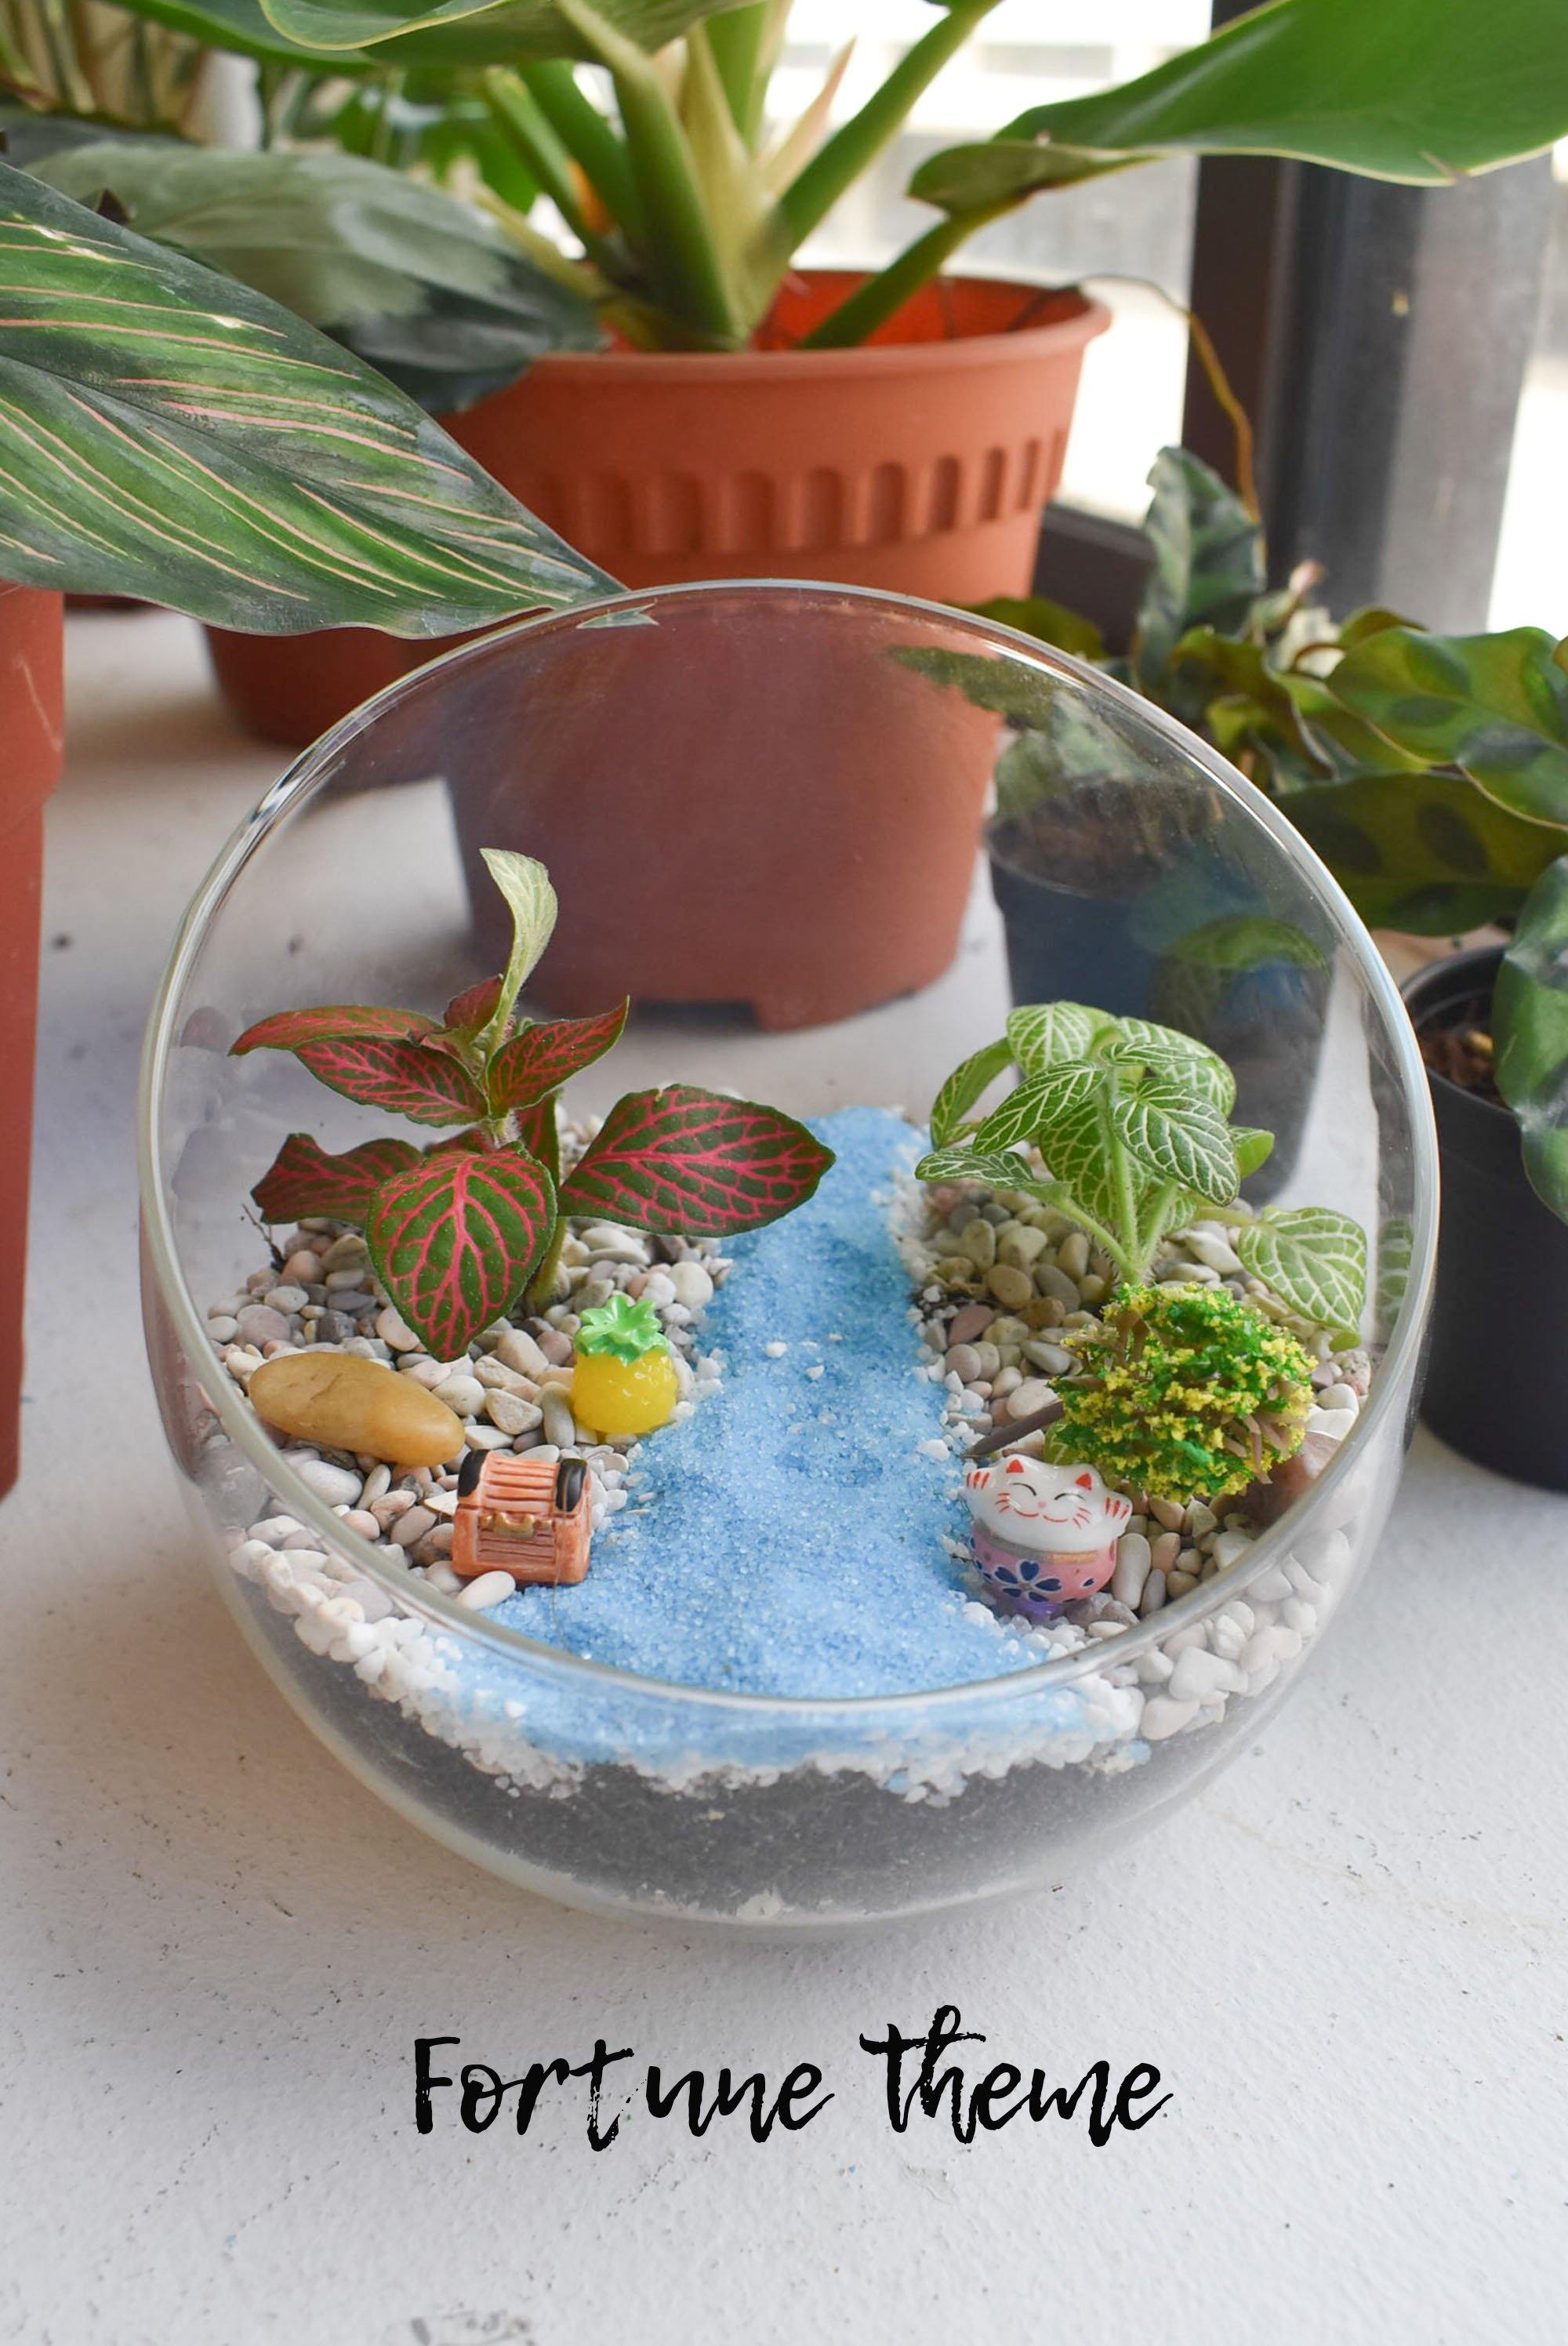 Fittonia Terrarium DIY Kit @ $37 (Delivery Included) - BYKidO